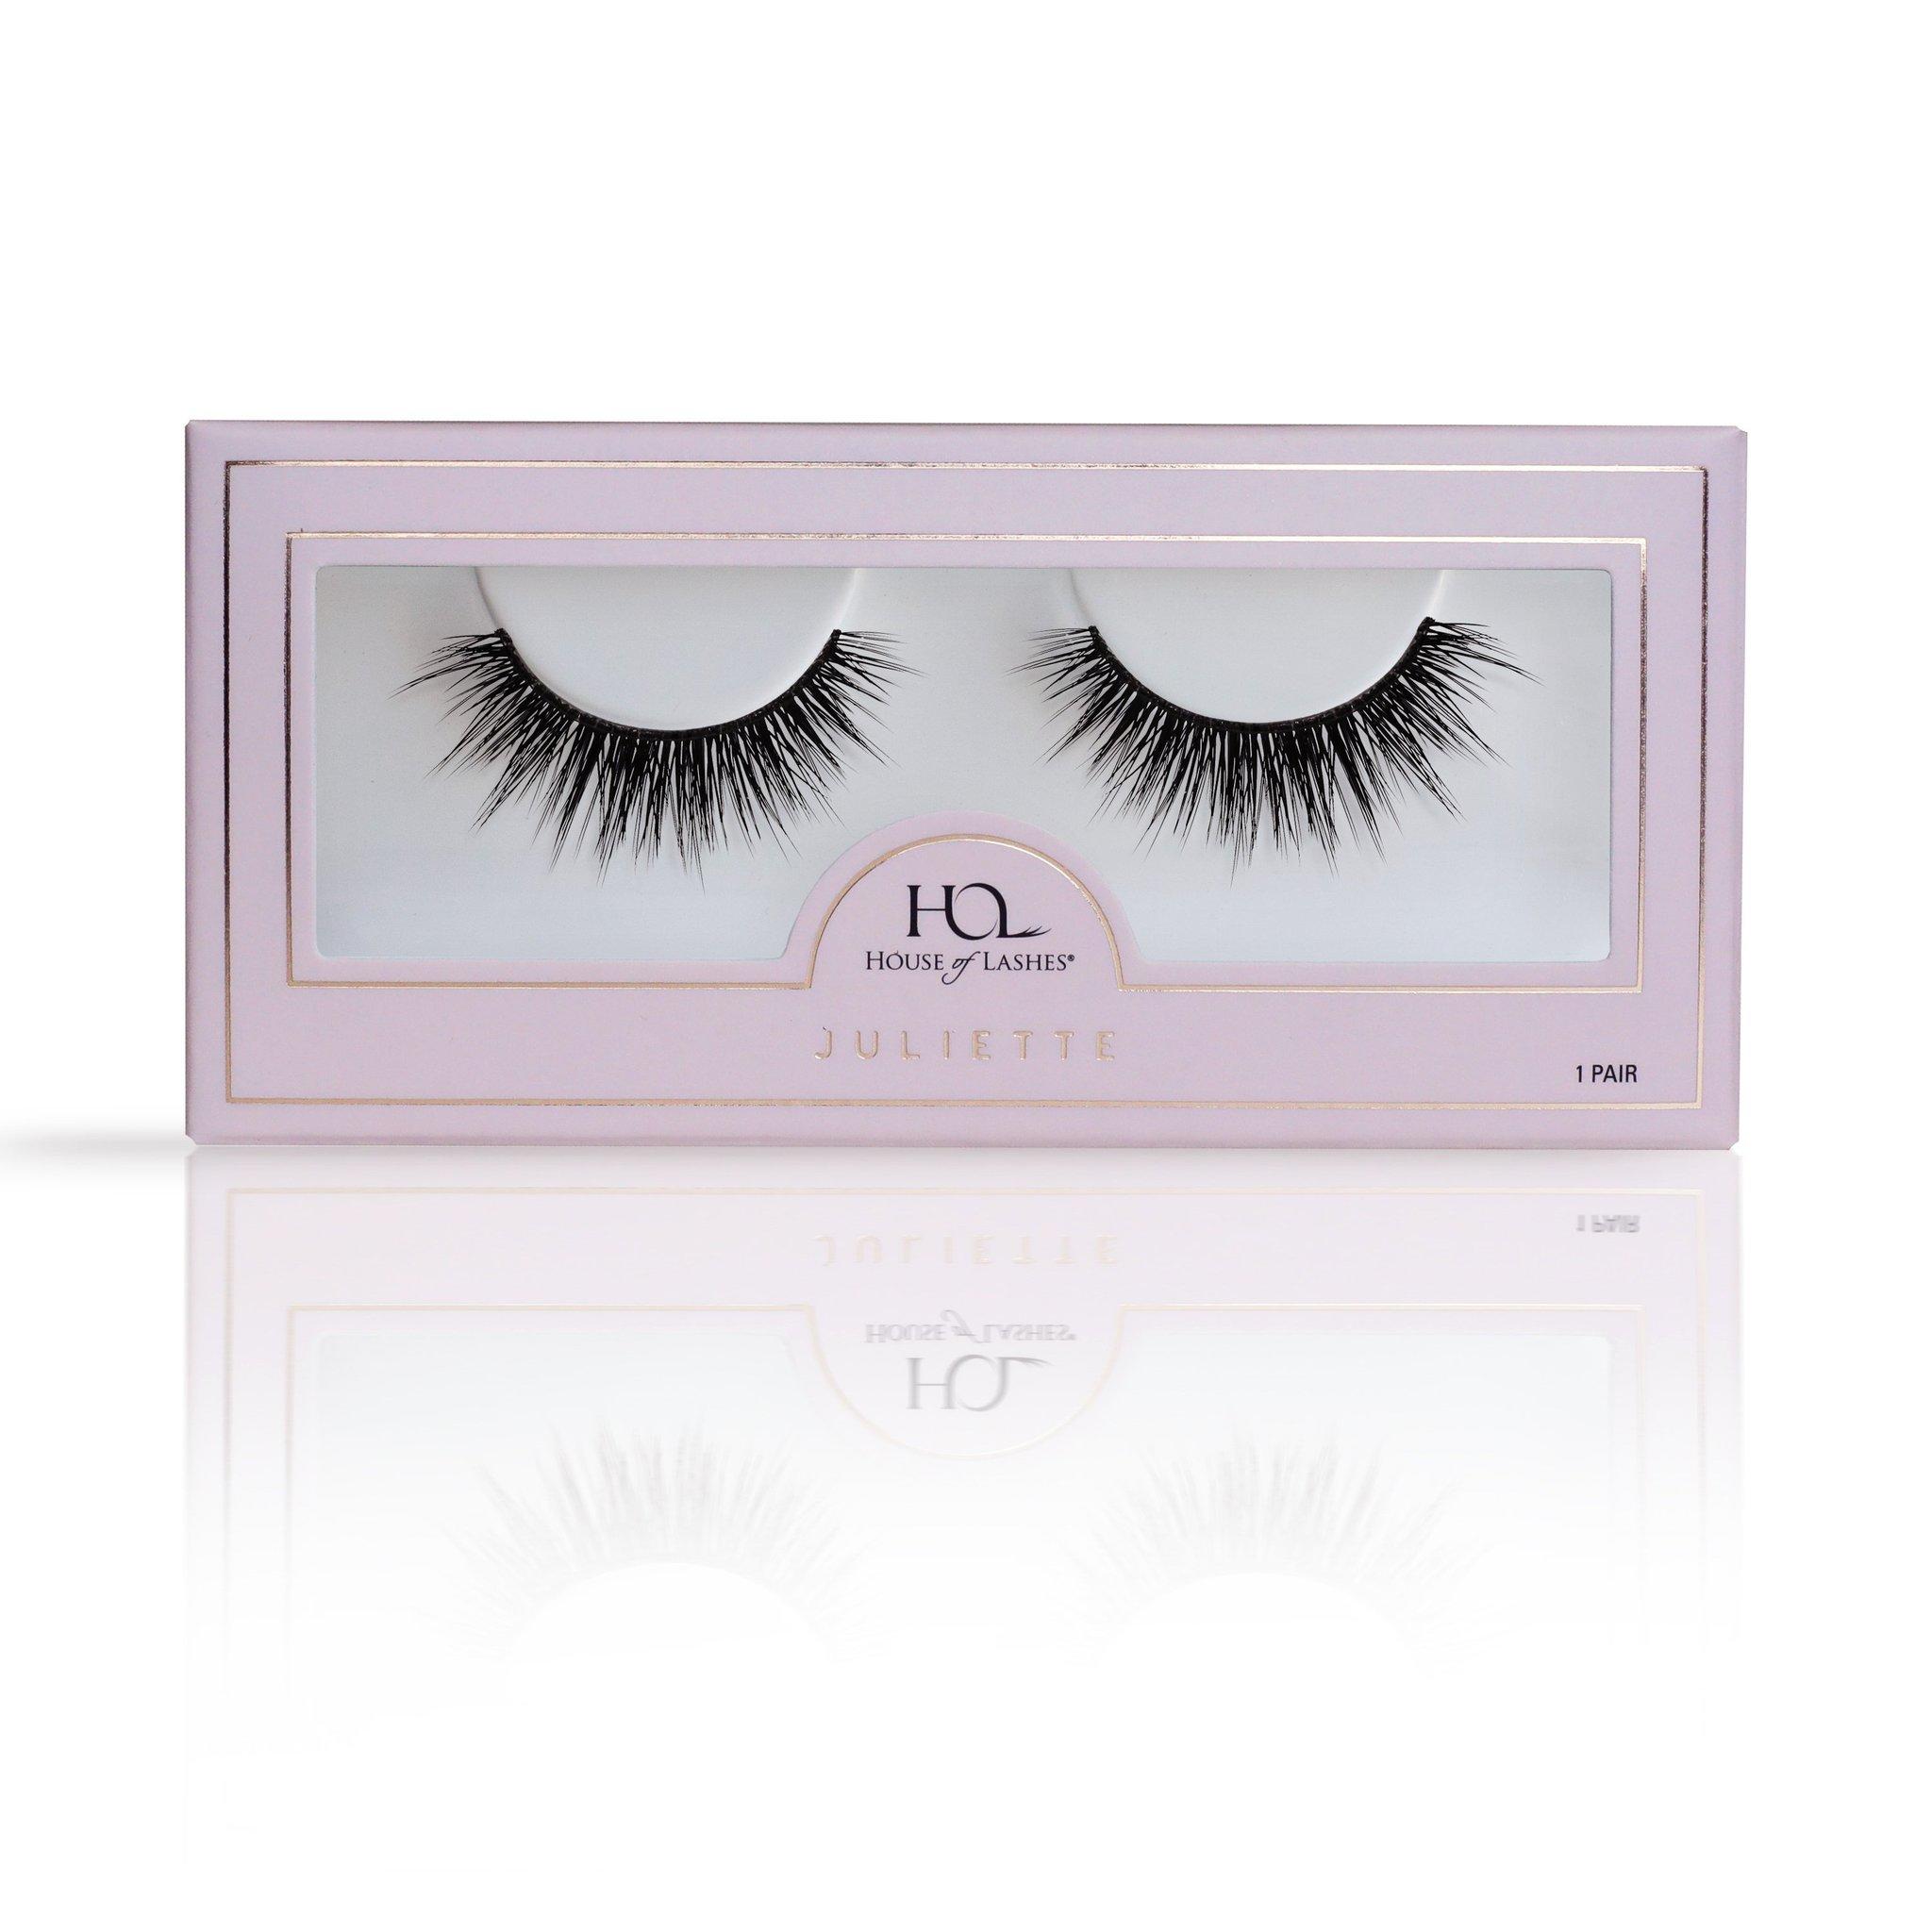 House Of Lashes Juliette